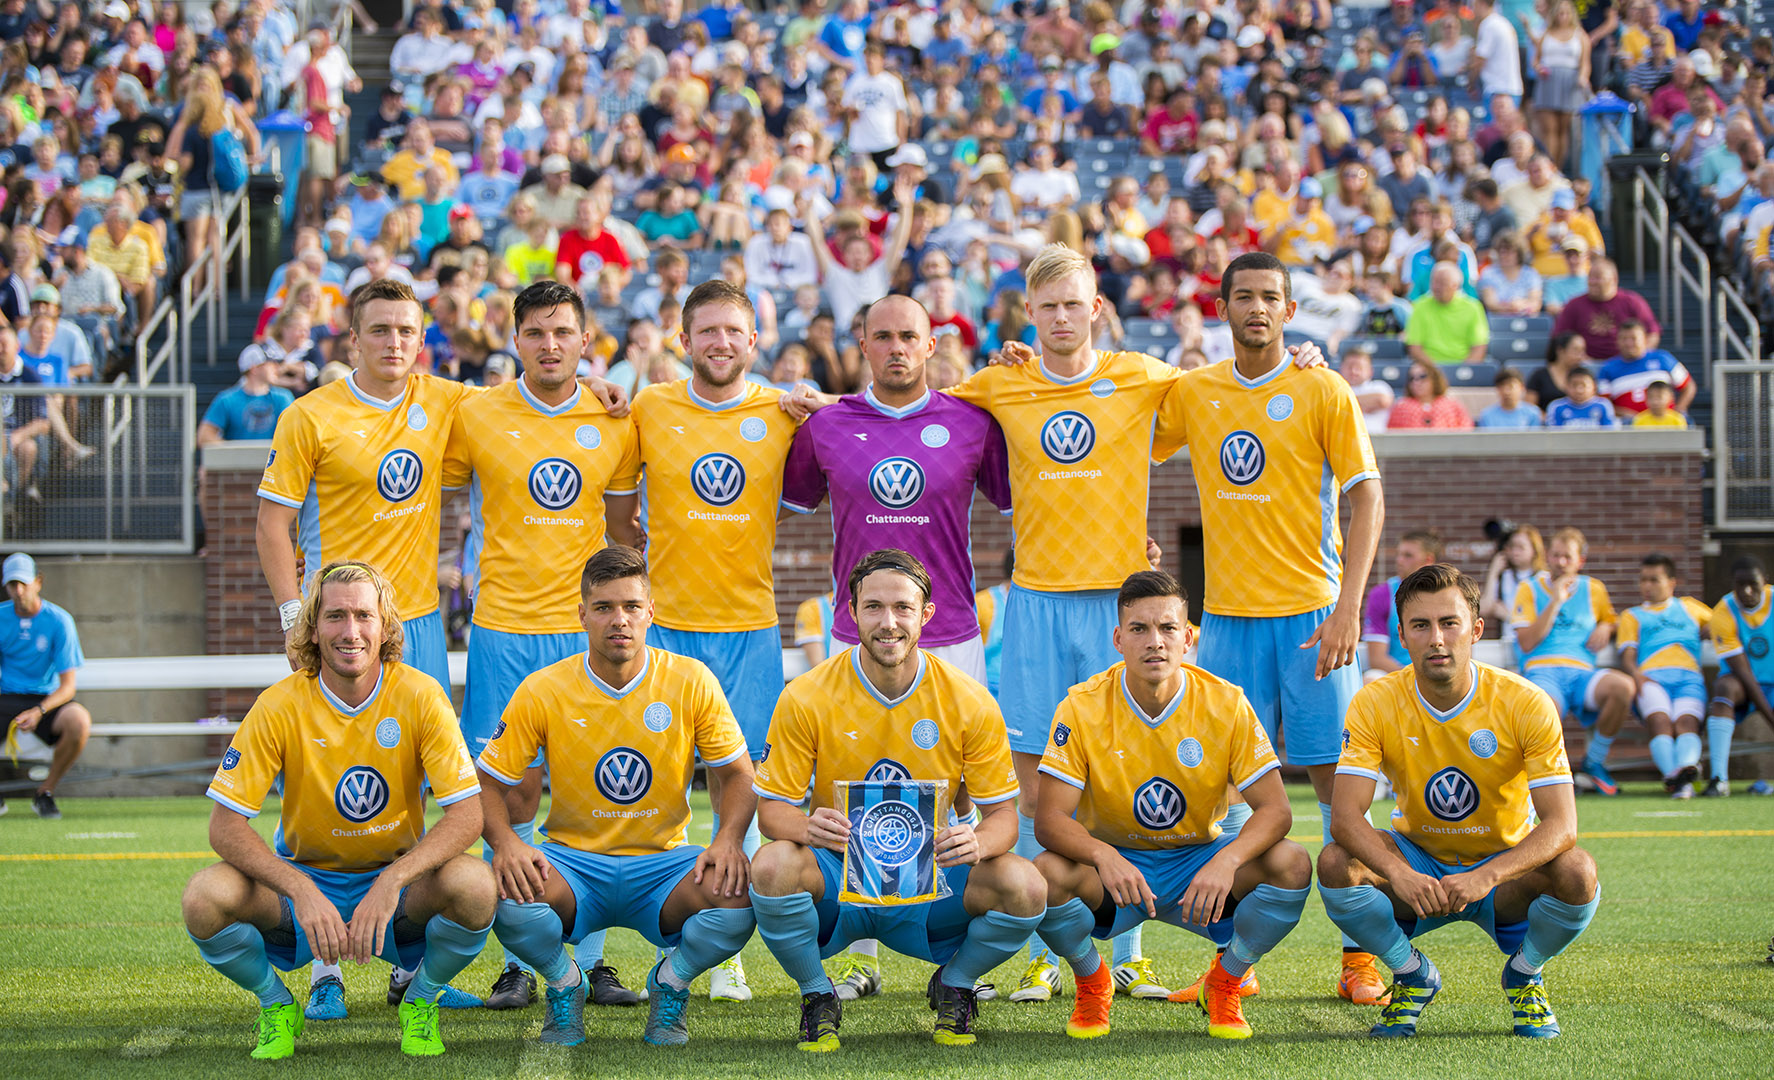 CHATTANOOGA FC'S TITLE PUSH CONTINUES • SoccerToday